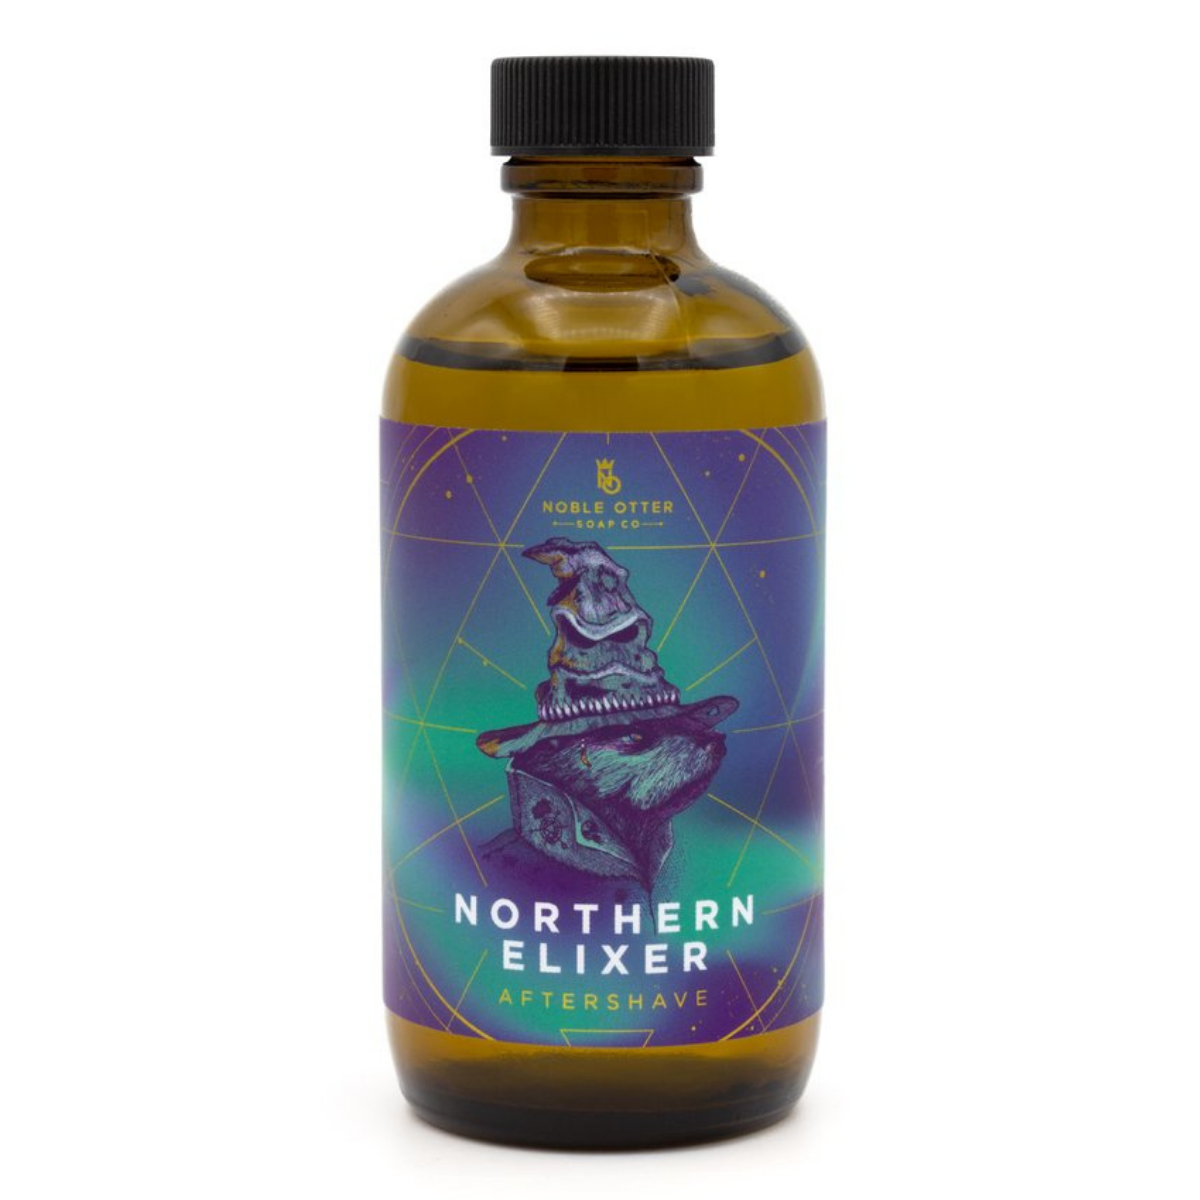 Primary image of Northern Elixir Aftershave